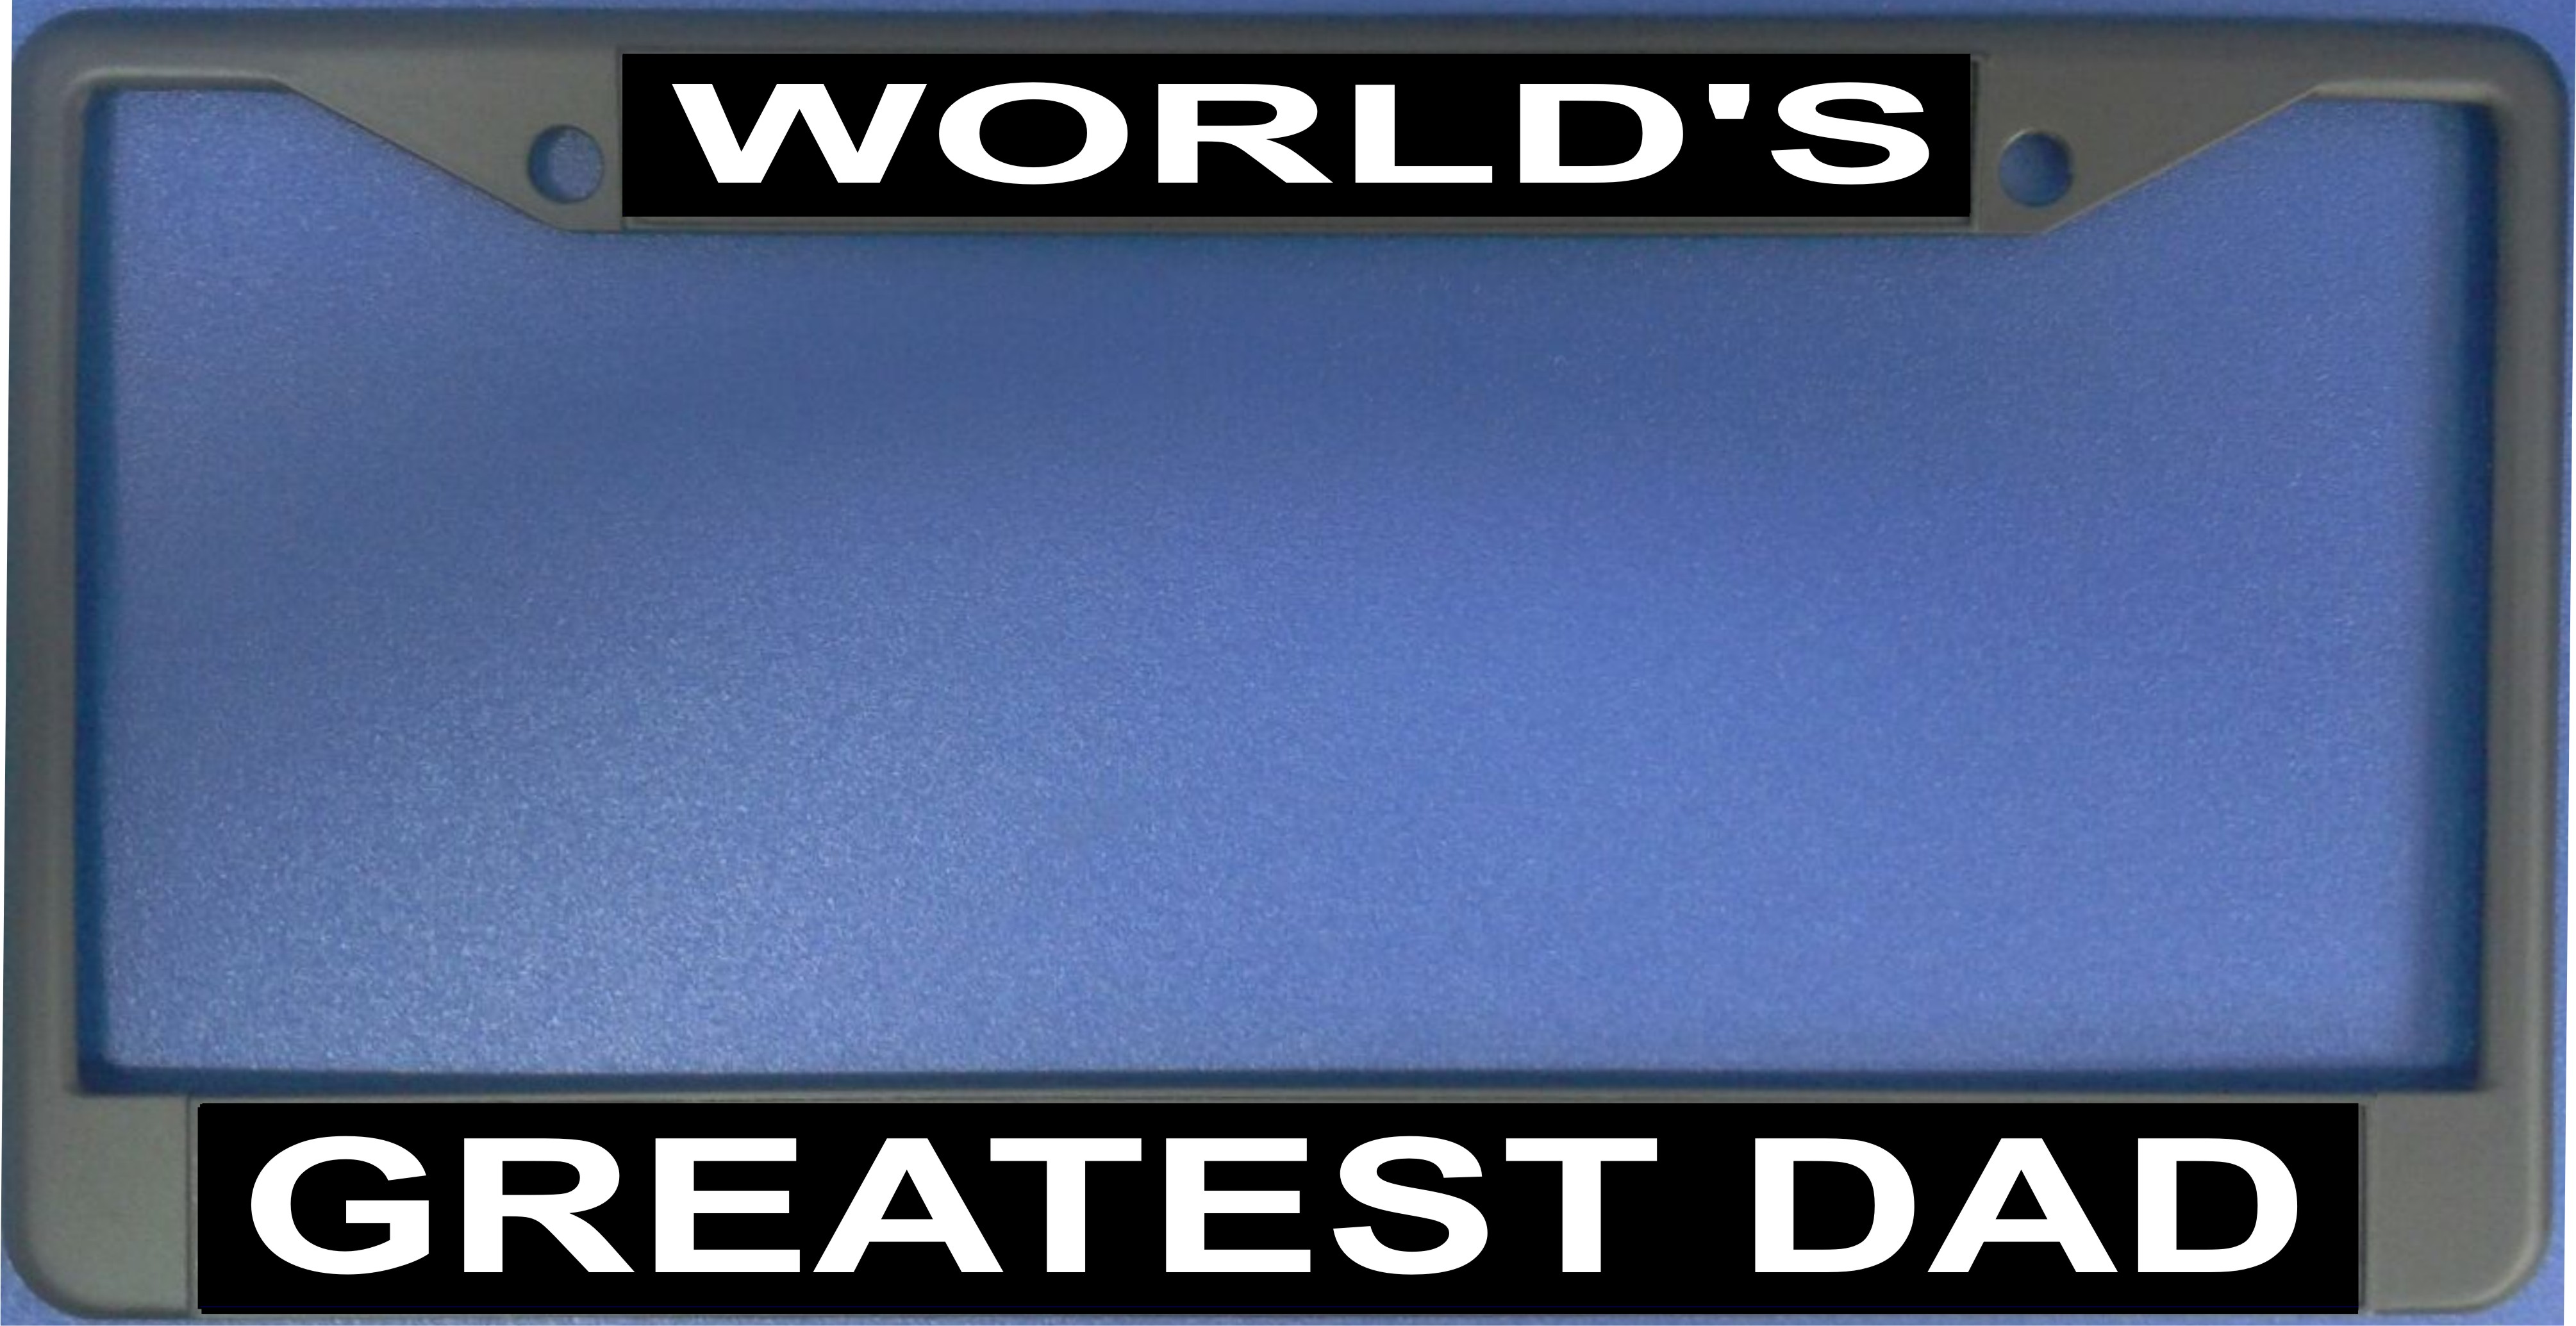 World's Greatest Dad Photo License Plate Frame Free SCREW Caps with this Frame